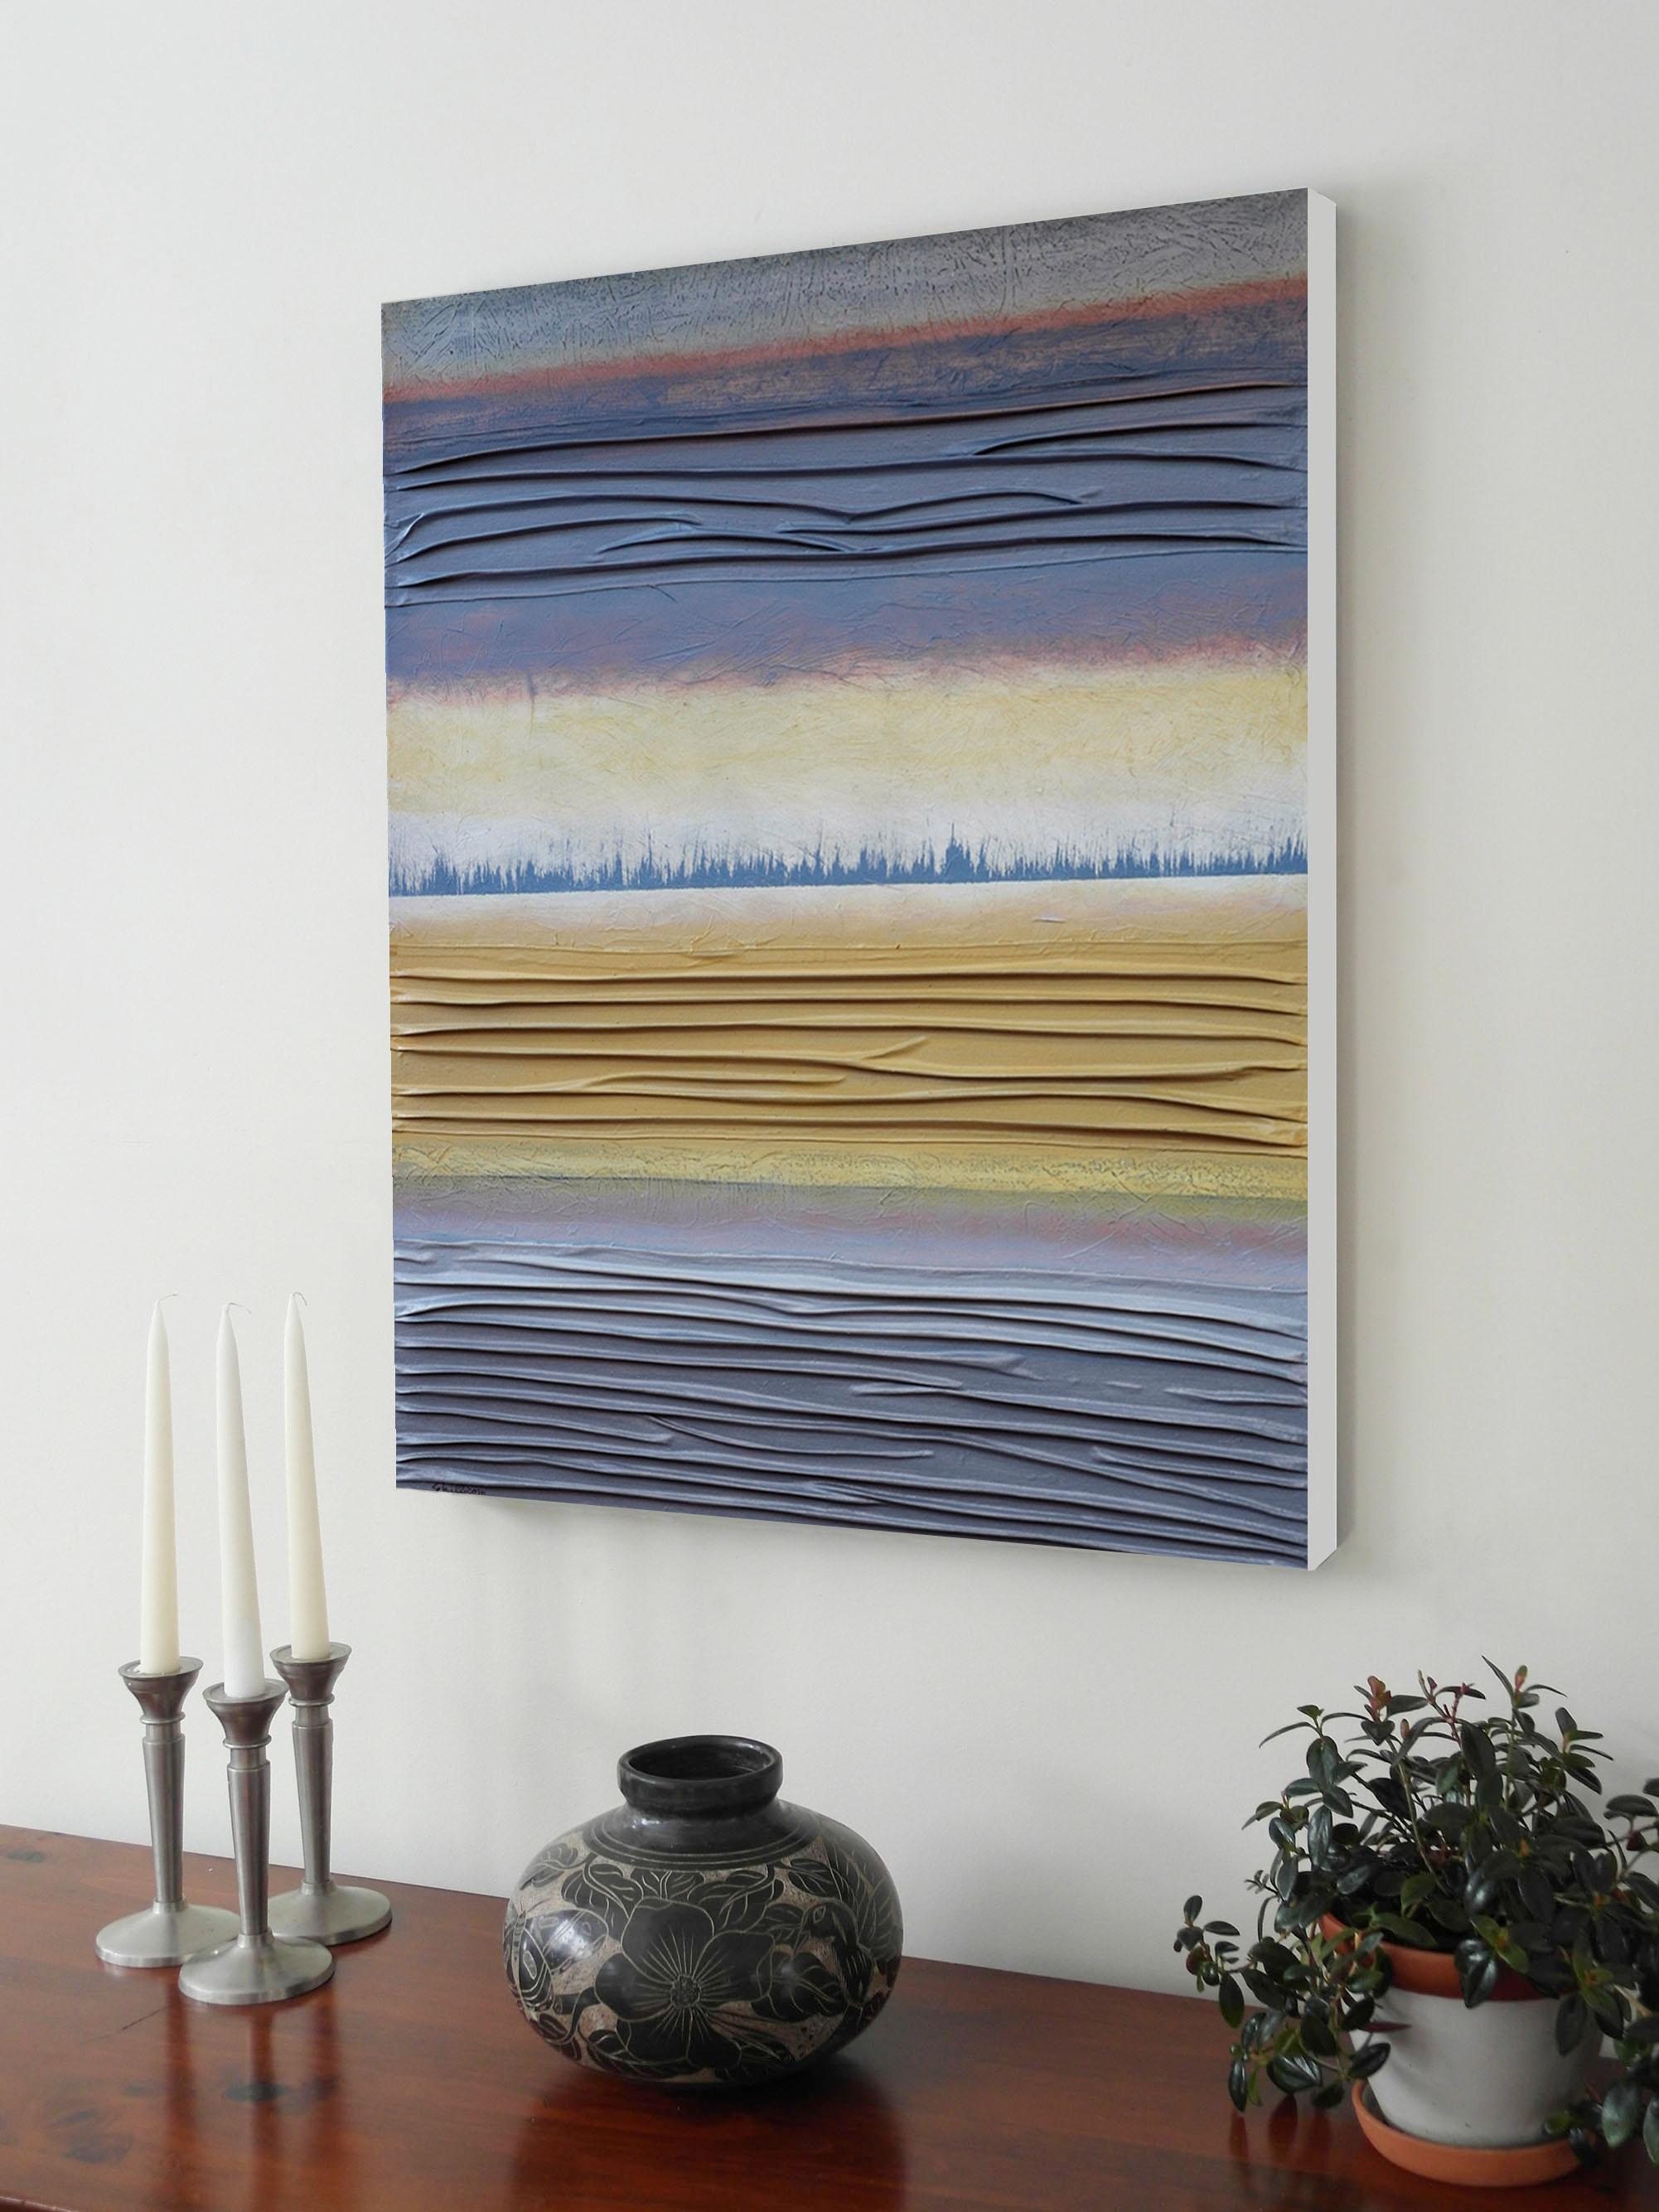 <p>Artist Comments<br />With the suggestion of a sunlit horizon, this mixed media oil painting brings to mind a morning view along the coast, with rippling water in the foreground and slowly rising clouds overhead. David explains that 'adagio' is